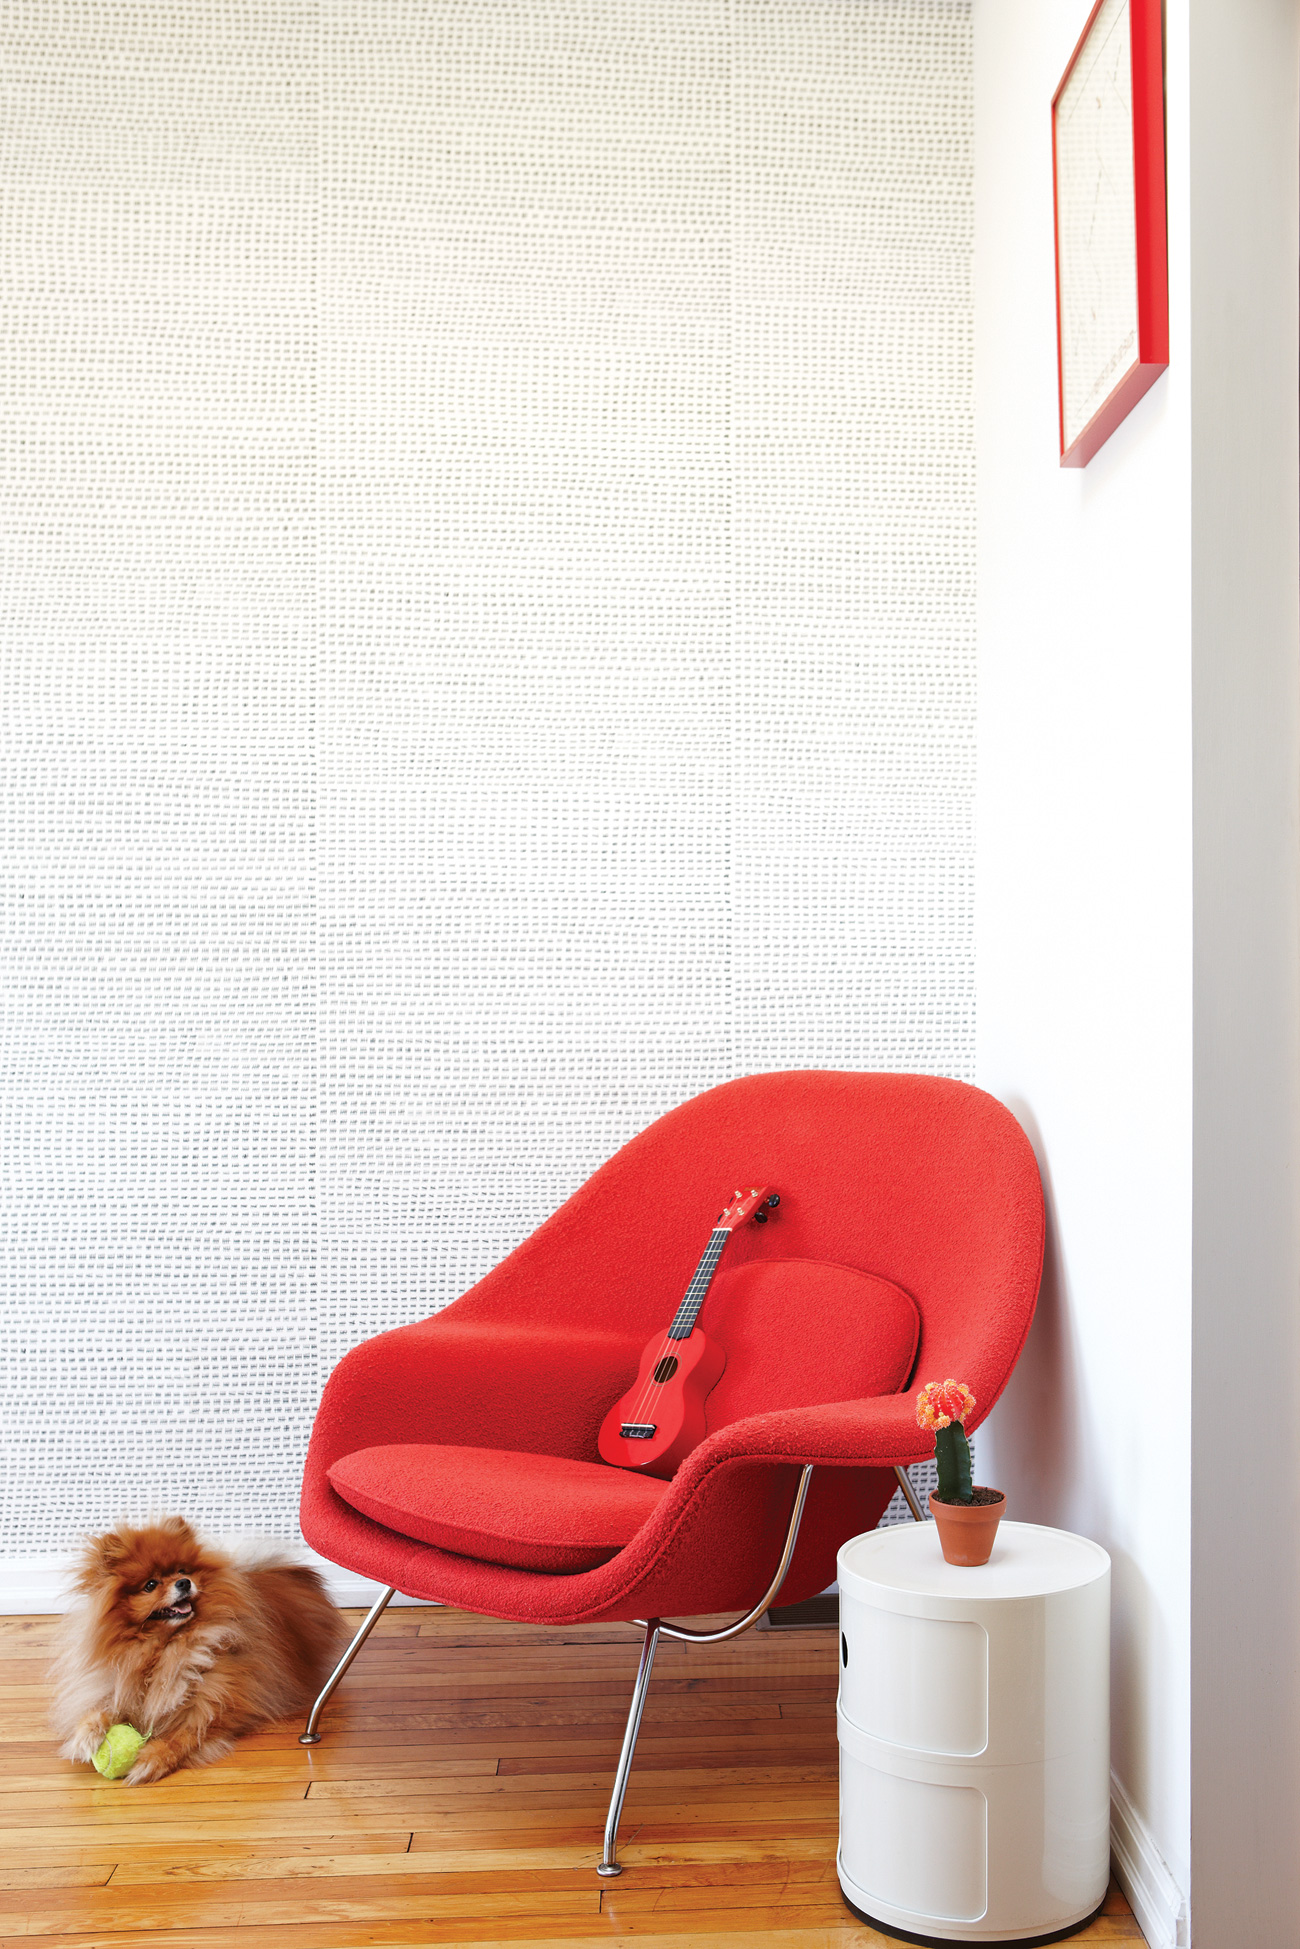 Kelly Mark’s 12345 wallpaper, with its tight rows of tally marks, was the perfect choice for the upstairs office. Womb chair available at Design Within Reach; the Kartell side table can be found at Quasi Modo.